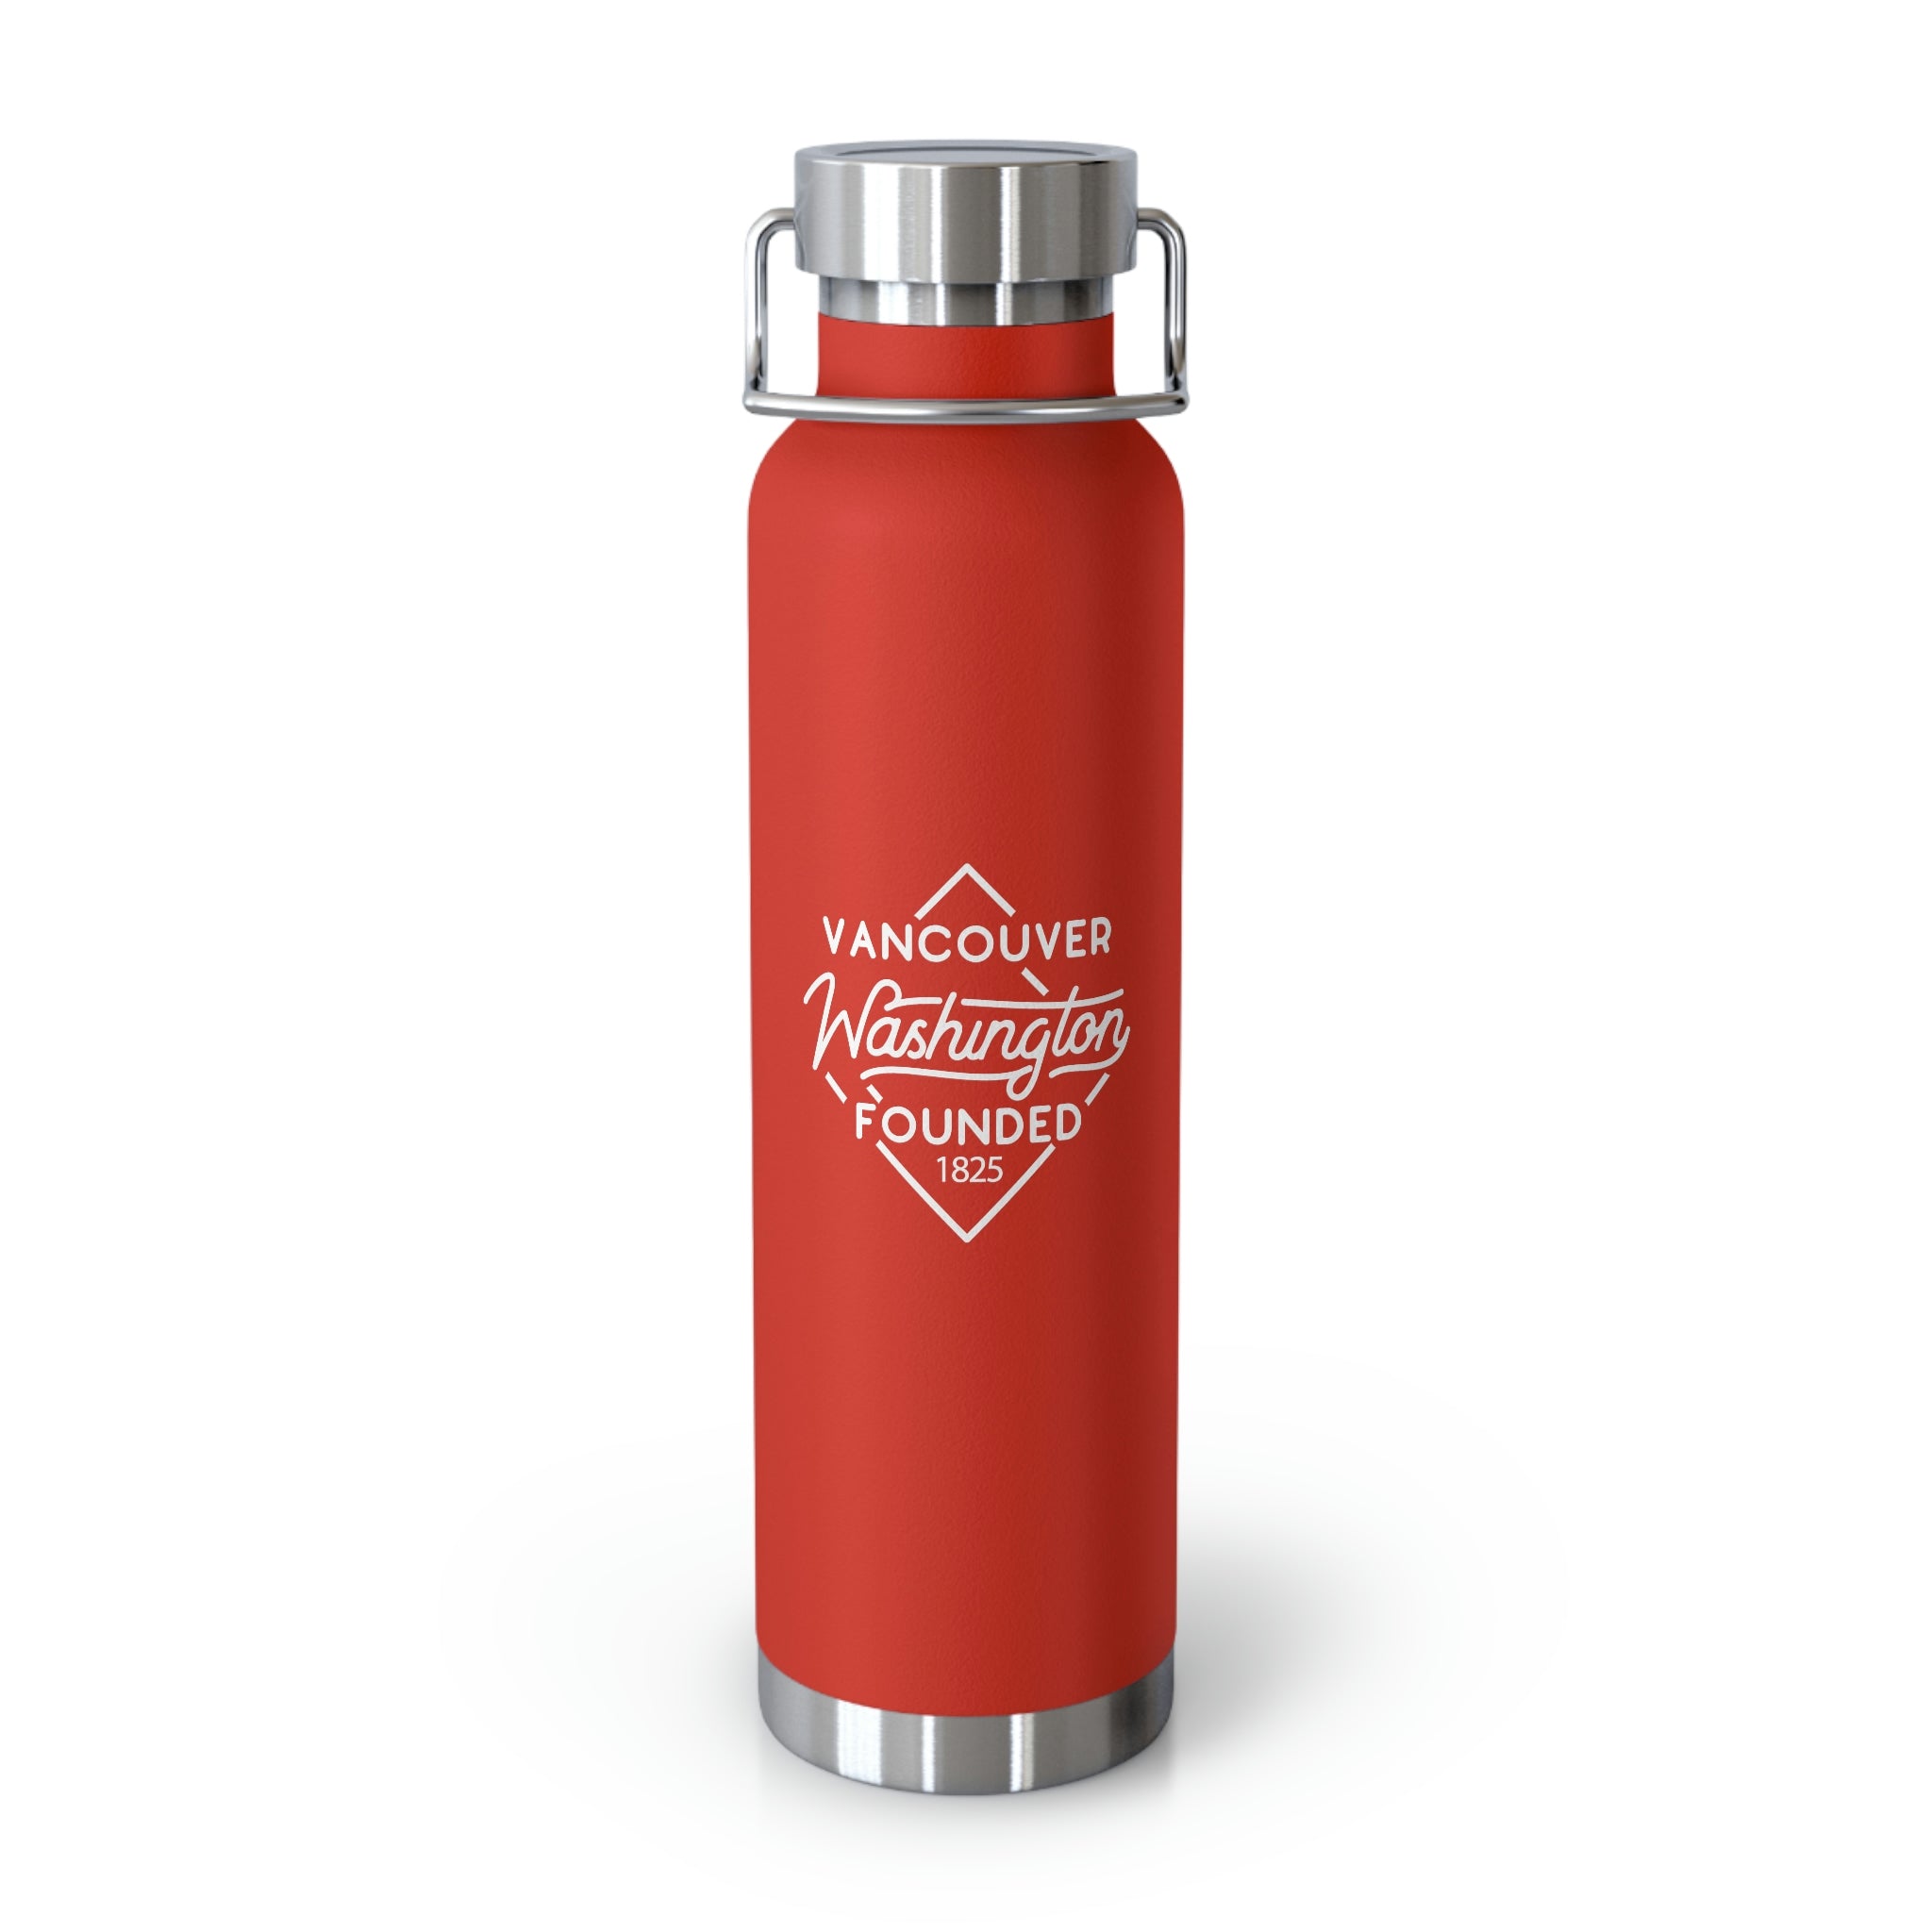 22oz Vacuum insulated tumbler for Vancouver, Washington in Red